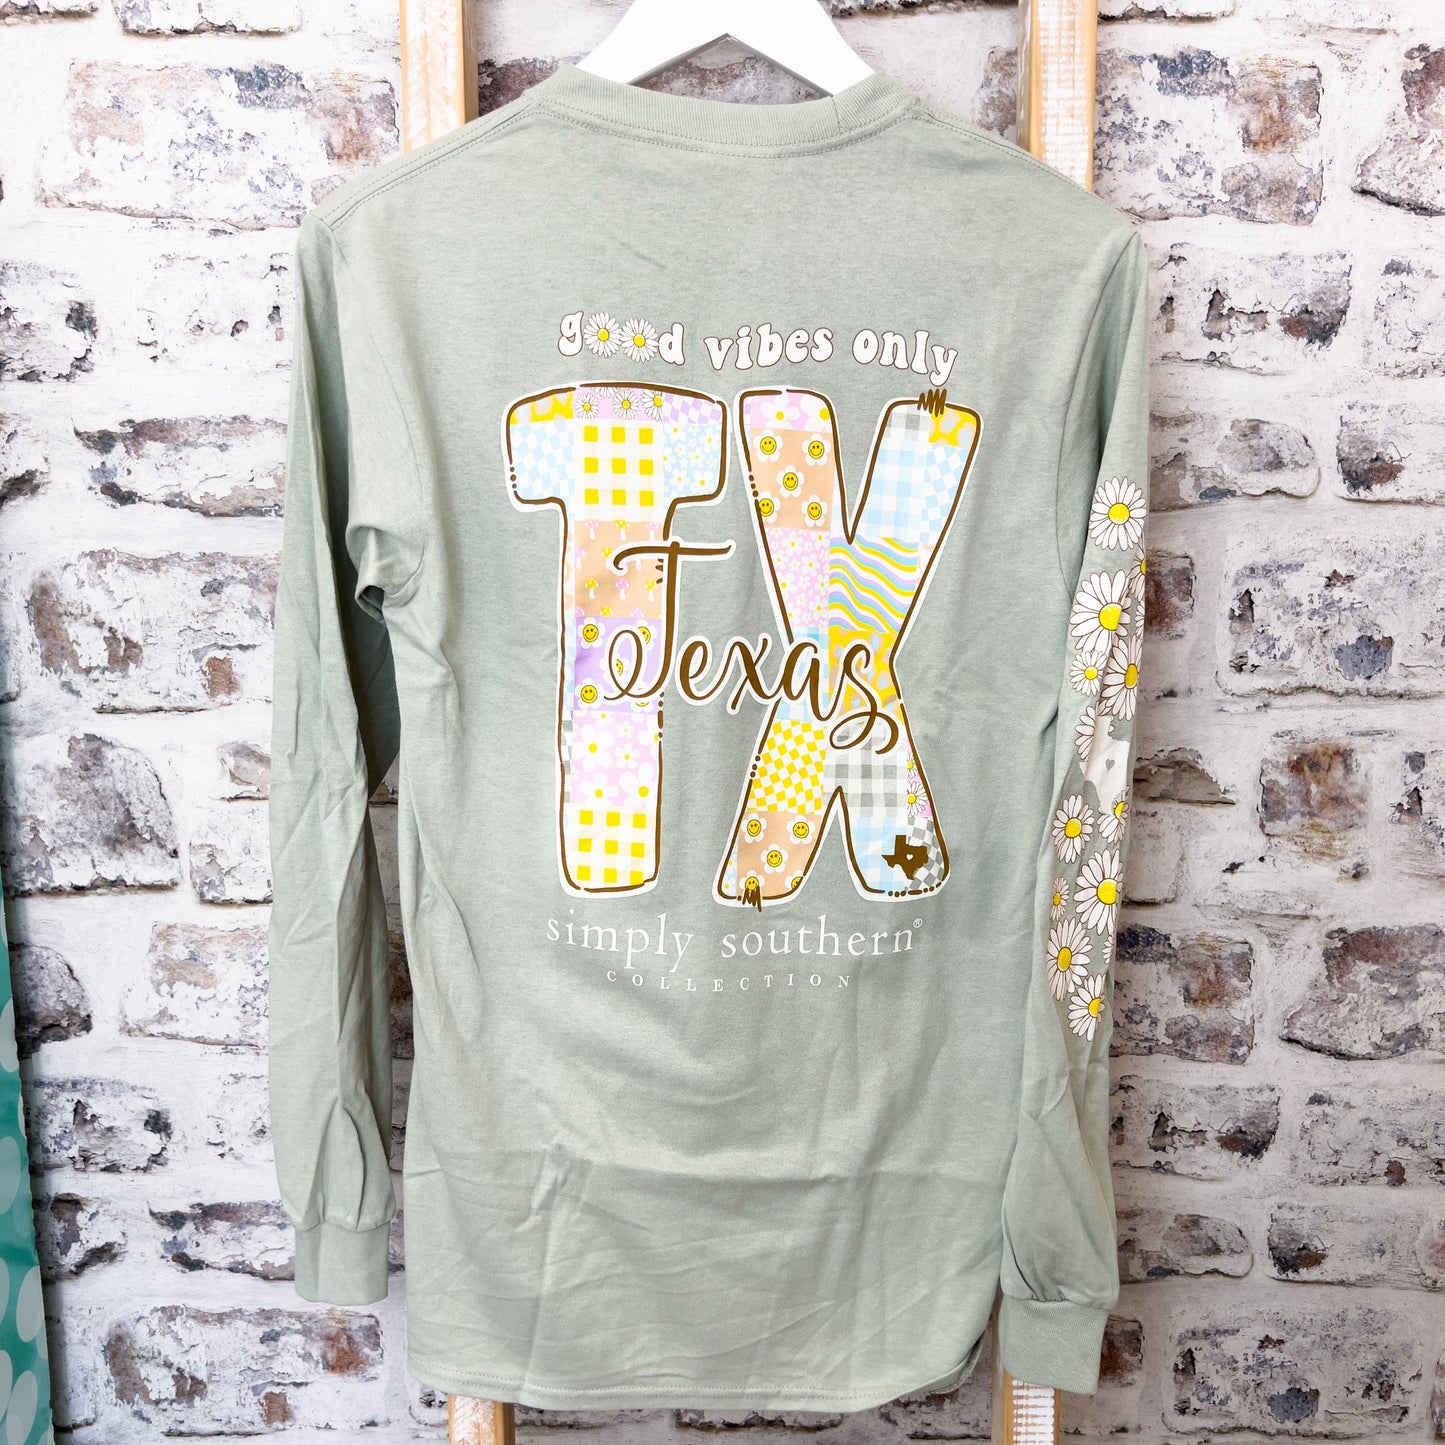 Envy Stylz Boutique Women - Apparel - Shirts - T-Shirts Texas Good Vibes Only Simply Southern Long Sleeve Soft Graphic Tee